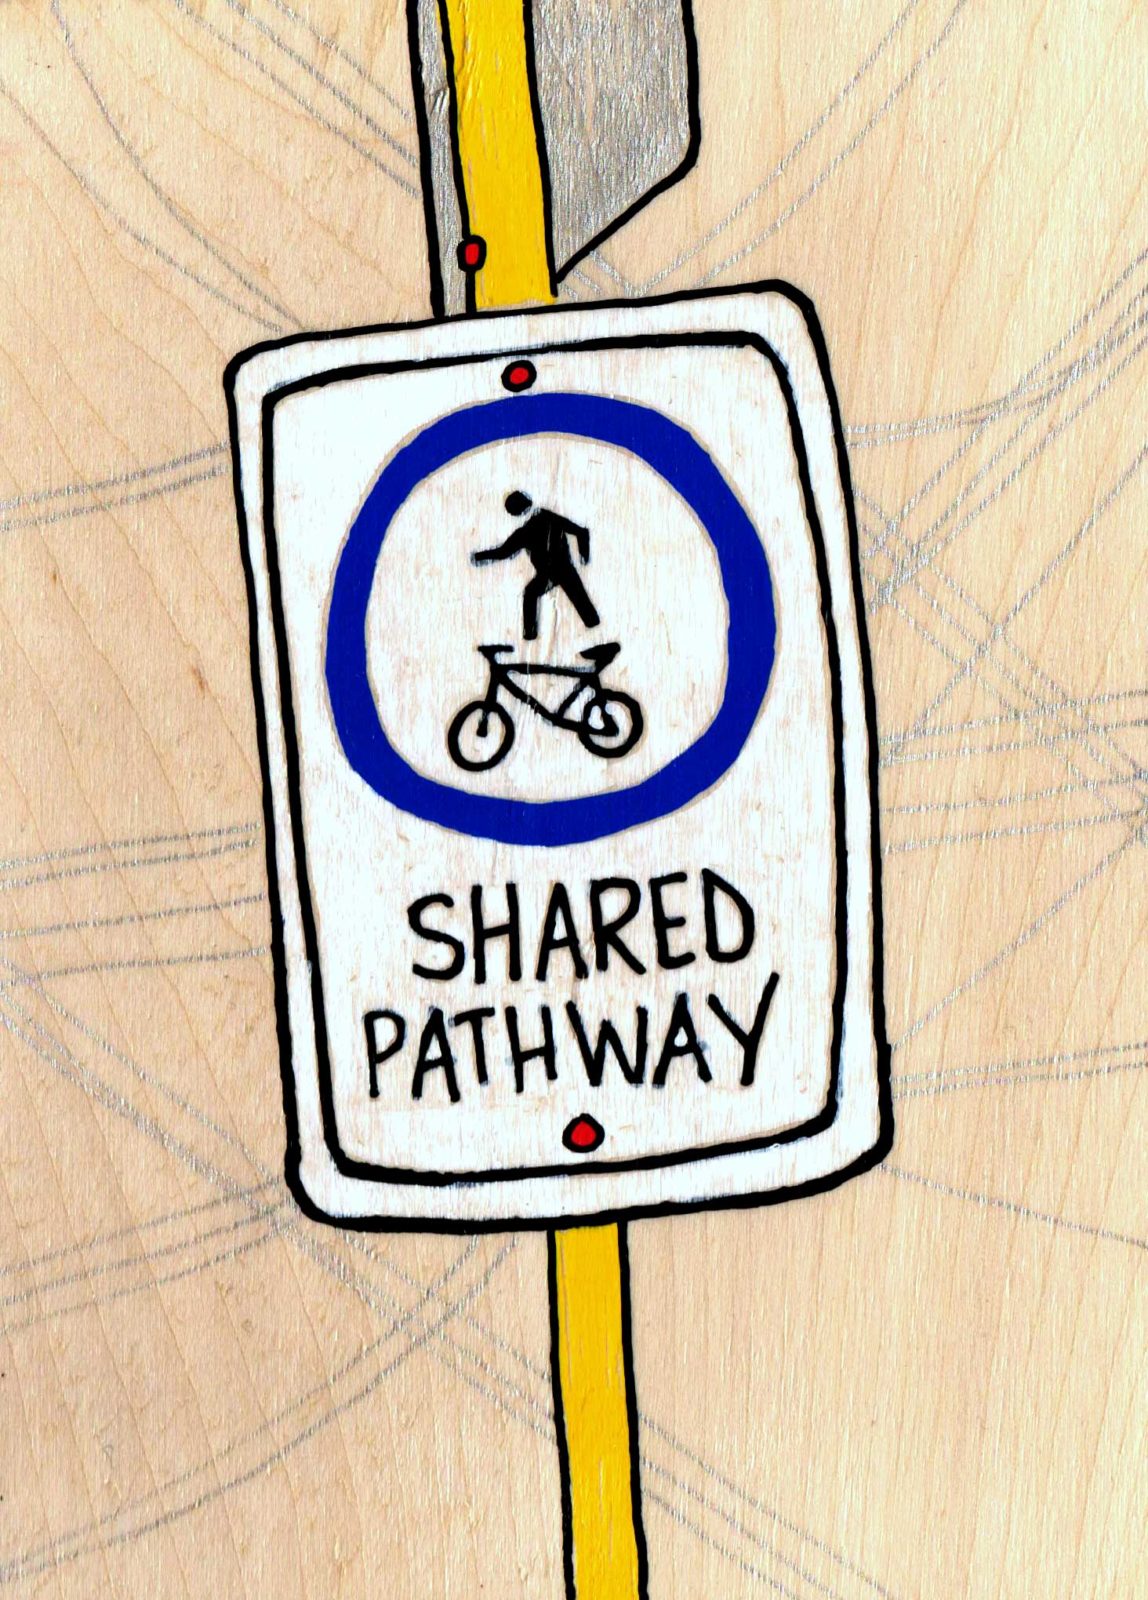 Caitlin McGuire, "Shared Pathway", 5"x7", Paint marker on birch, 2016 